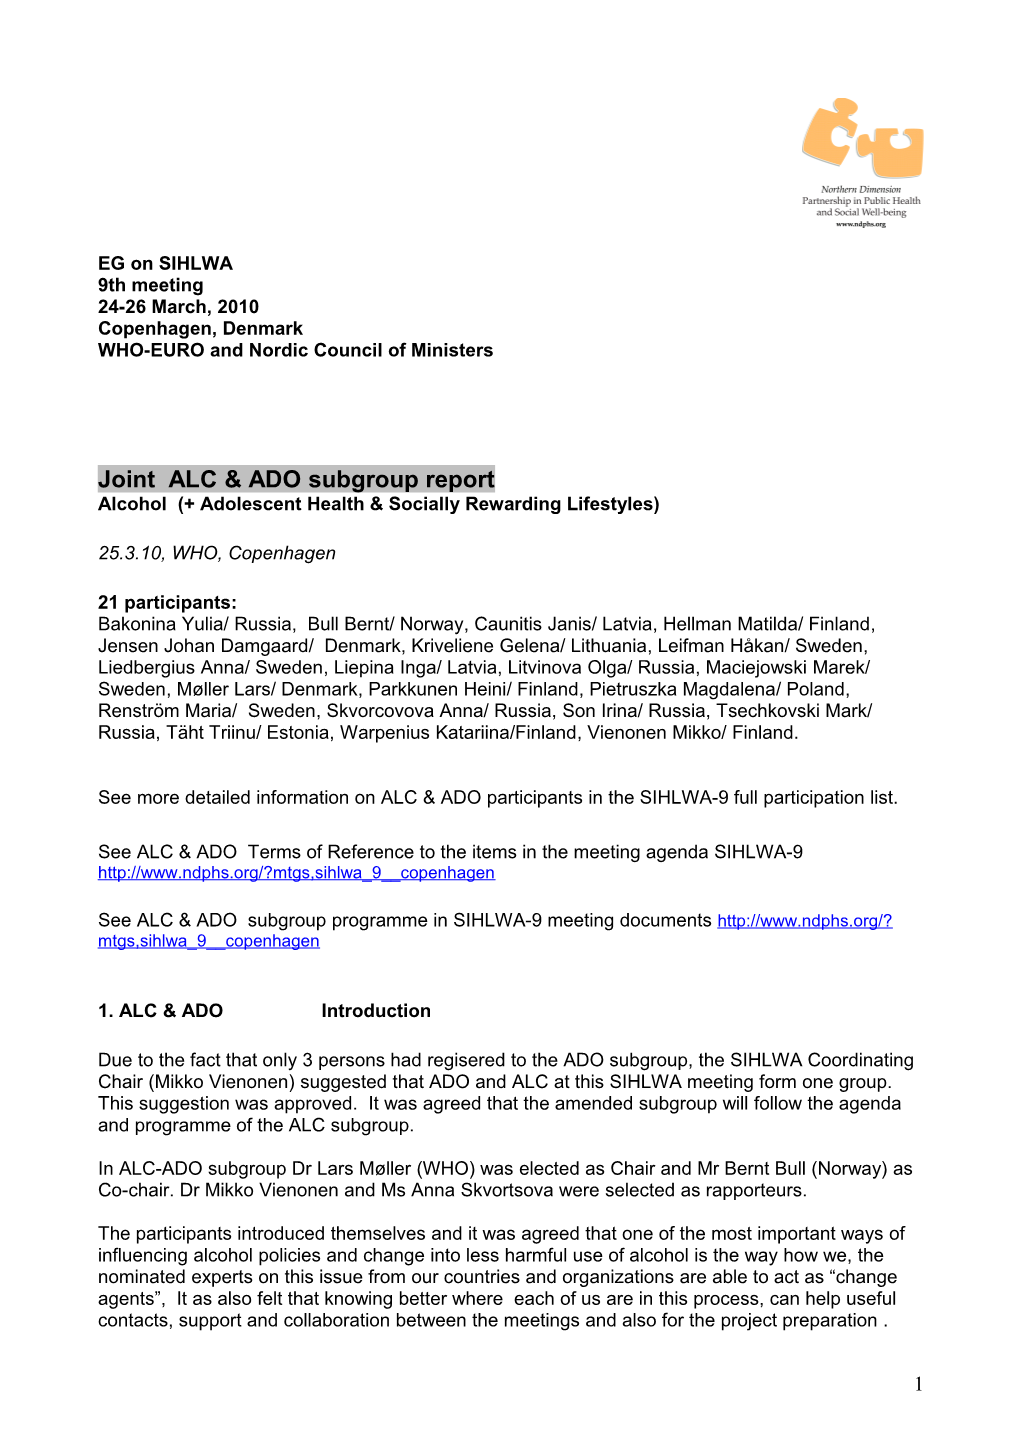 Joint ALC & ADO Subgroup Report